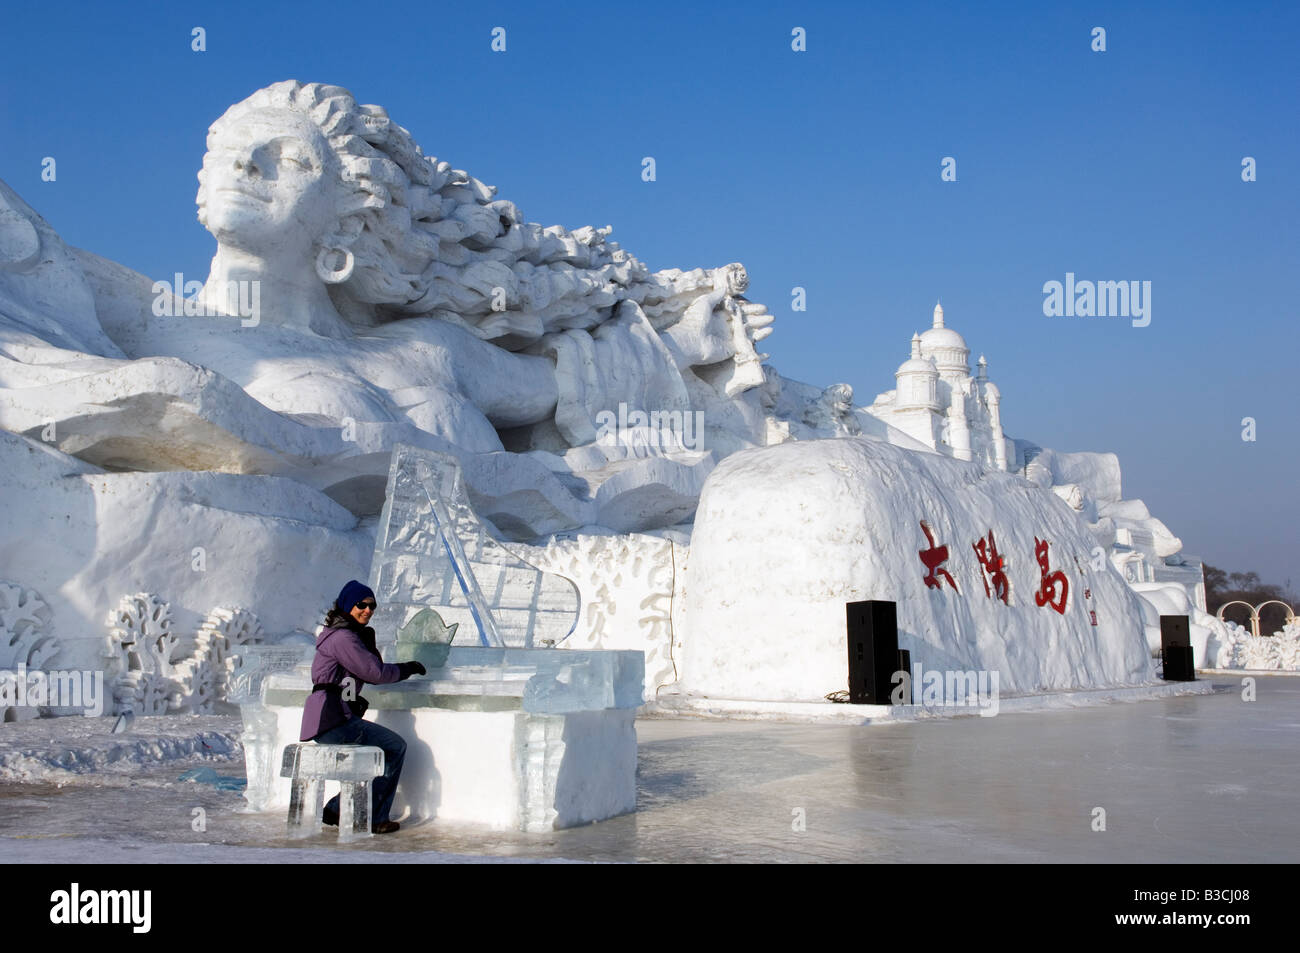 China, Northeast China, Heilongjiang Province, Harbin City. Snow and Ice Sculpture Festival at Sun Island Park. A tourist is playing a sculpted ice piano in front of giant snow sculptures. Stock Photo